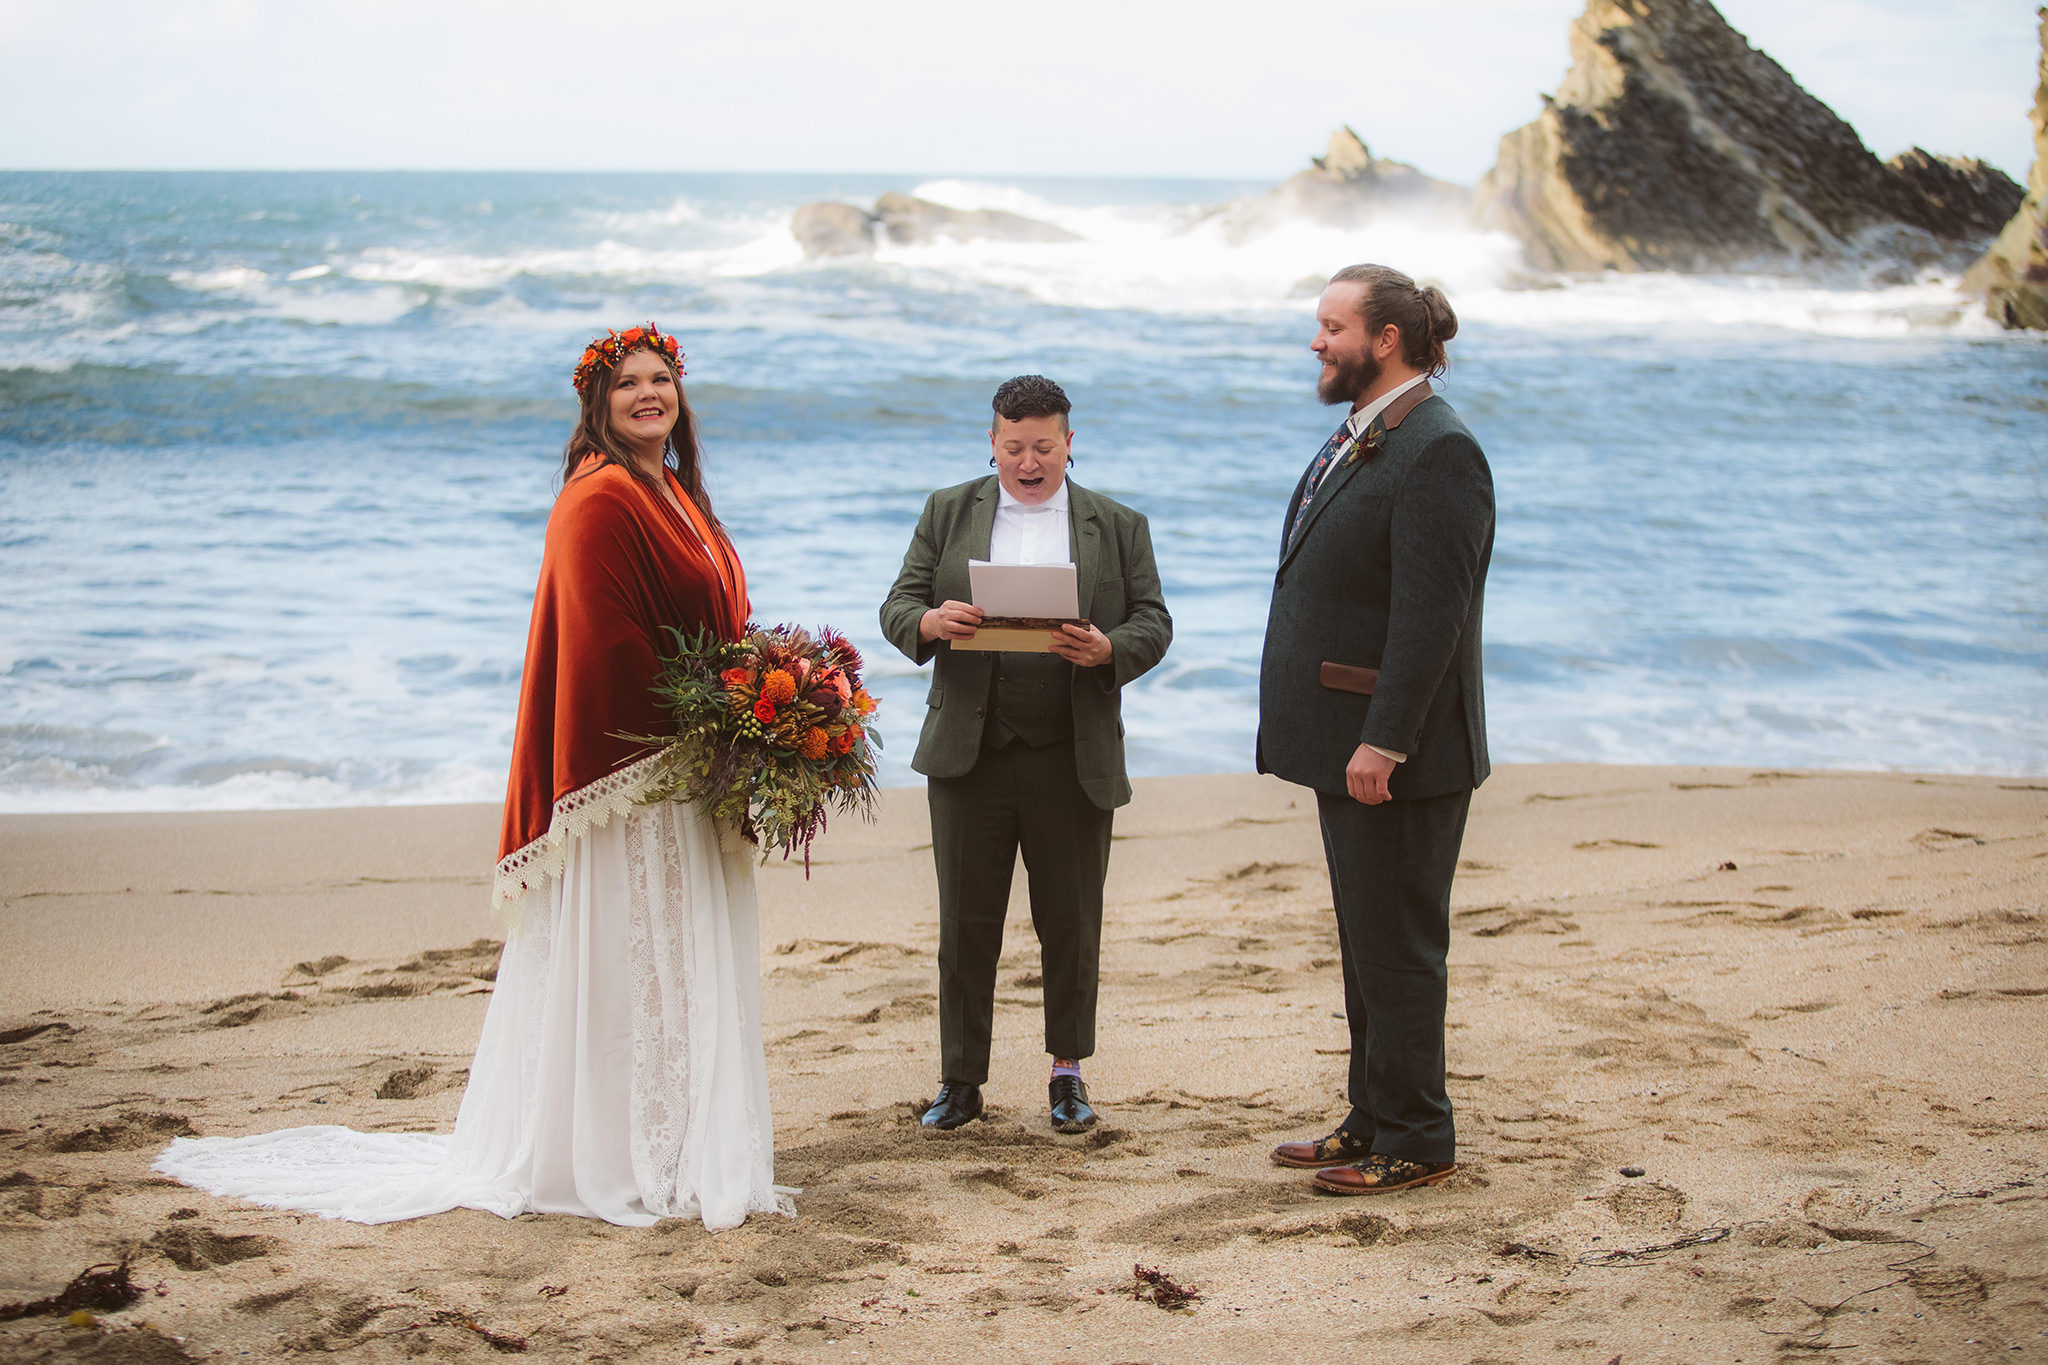 Water crashing into the cliffs during an elopement ceremony on the beach at Shore Acres state park in Coos Bay, Oregon